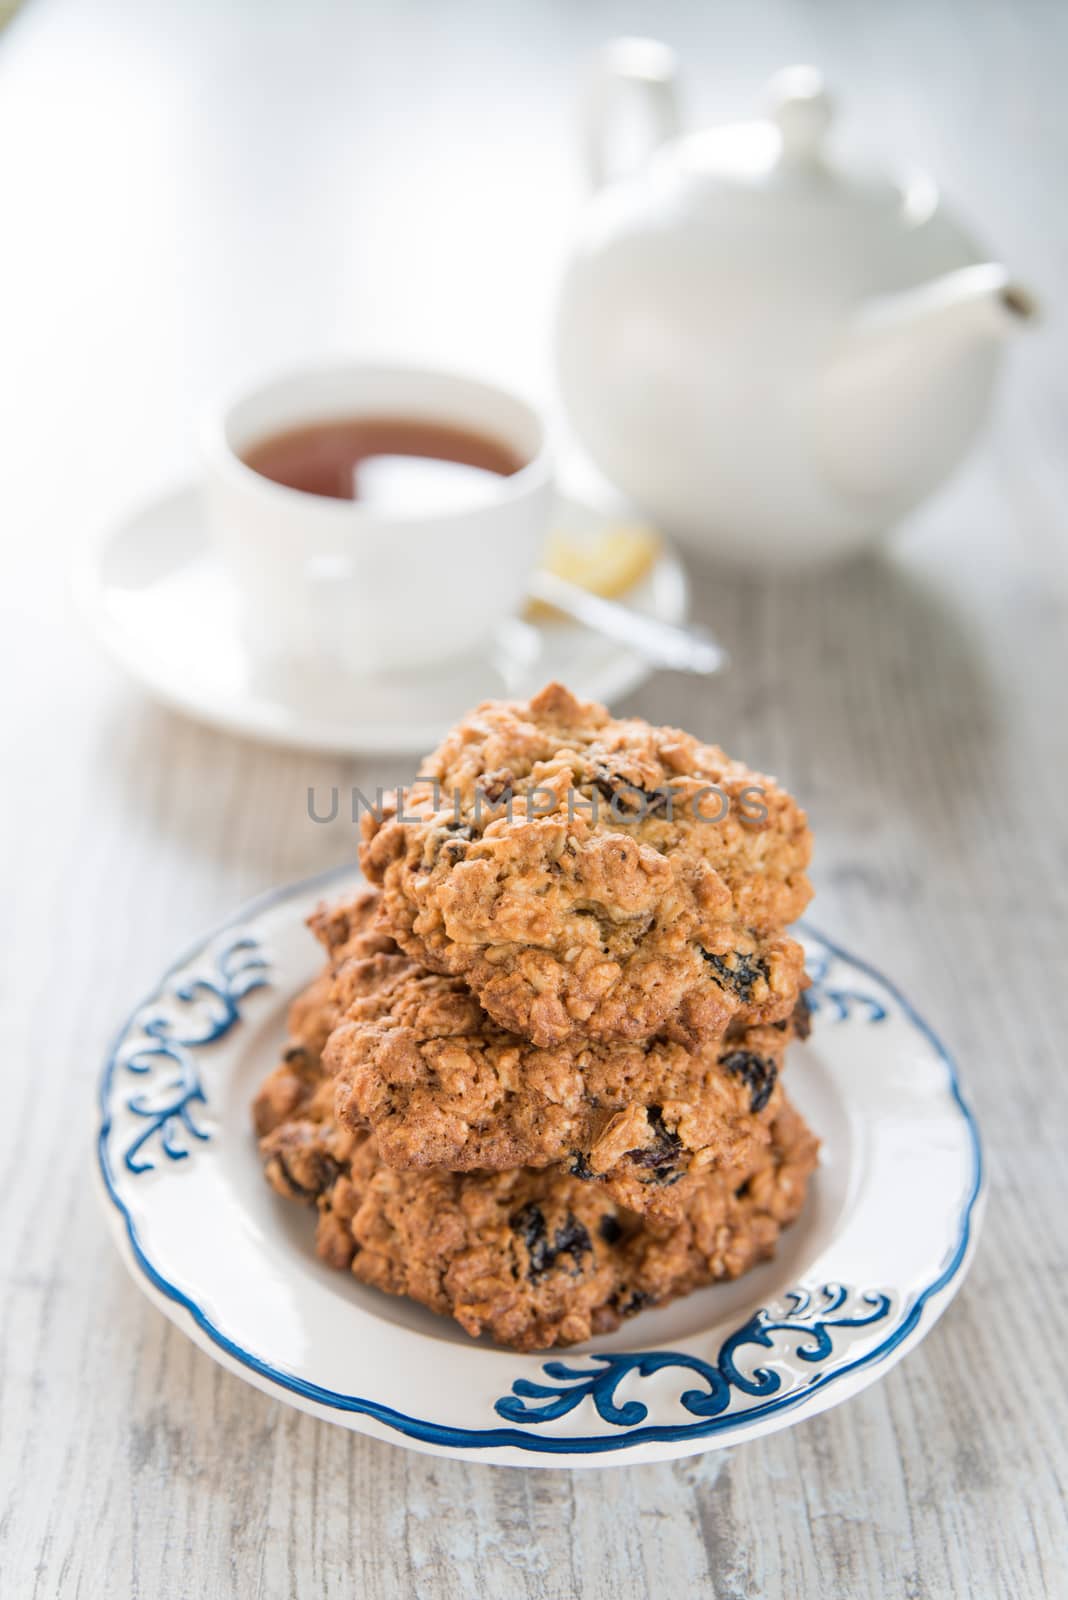 Oatmeal cookies on the plate by Linaga